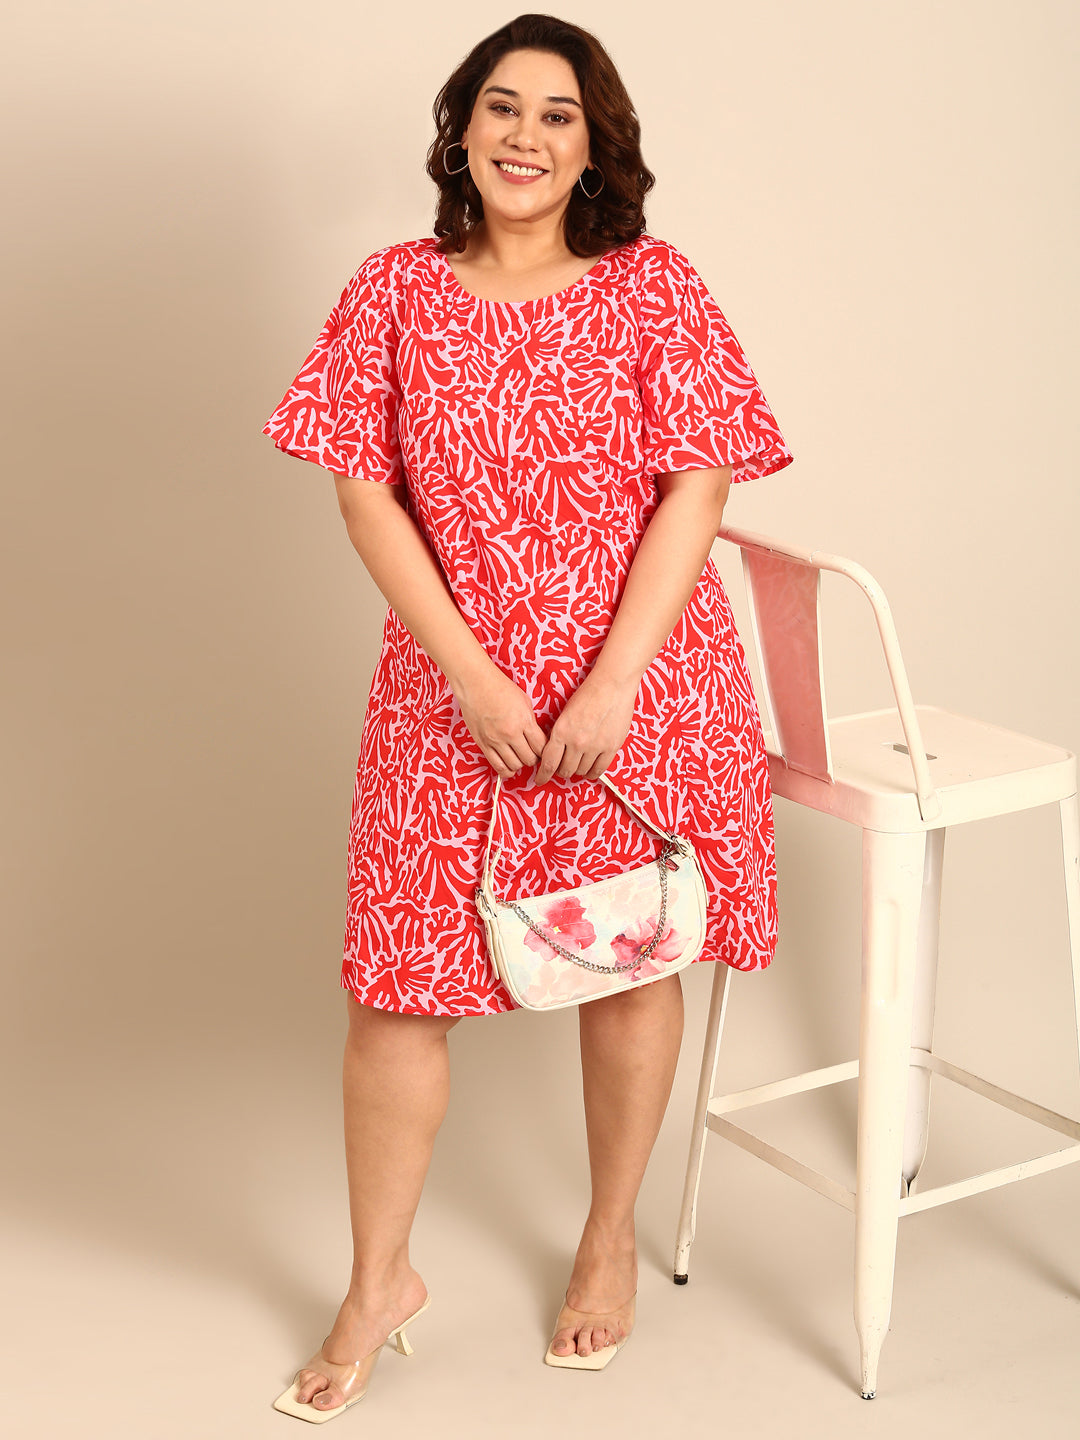 PINK AND RED PRINTED A-LINE DRESS